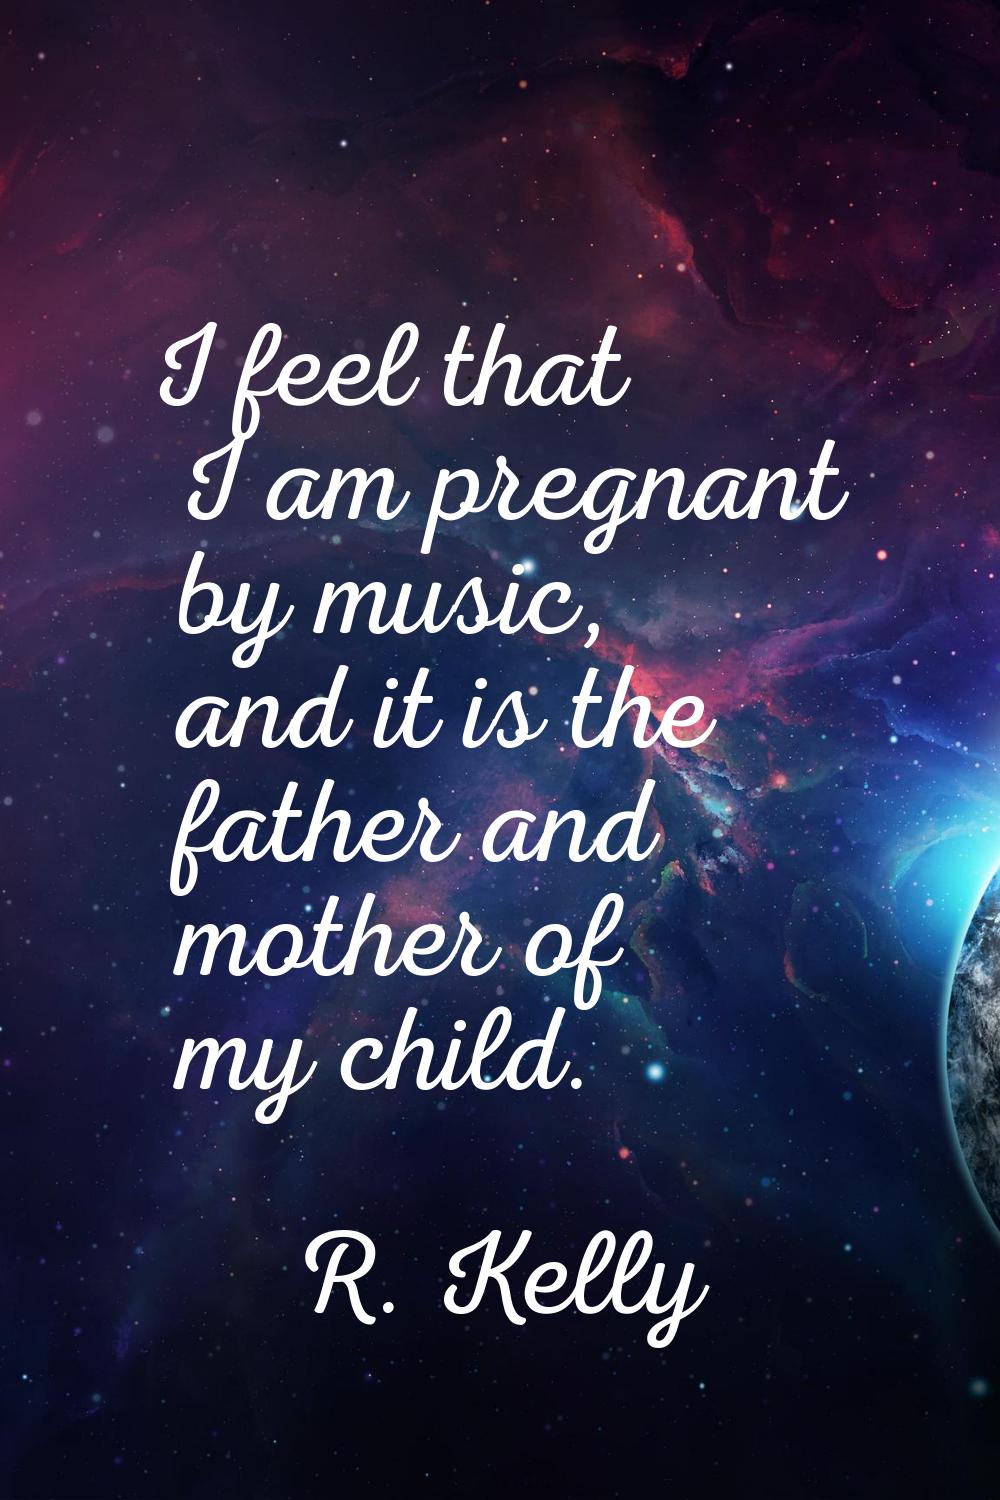 I feel that I am pregnant by music, and it is the father and mother of my child.